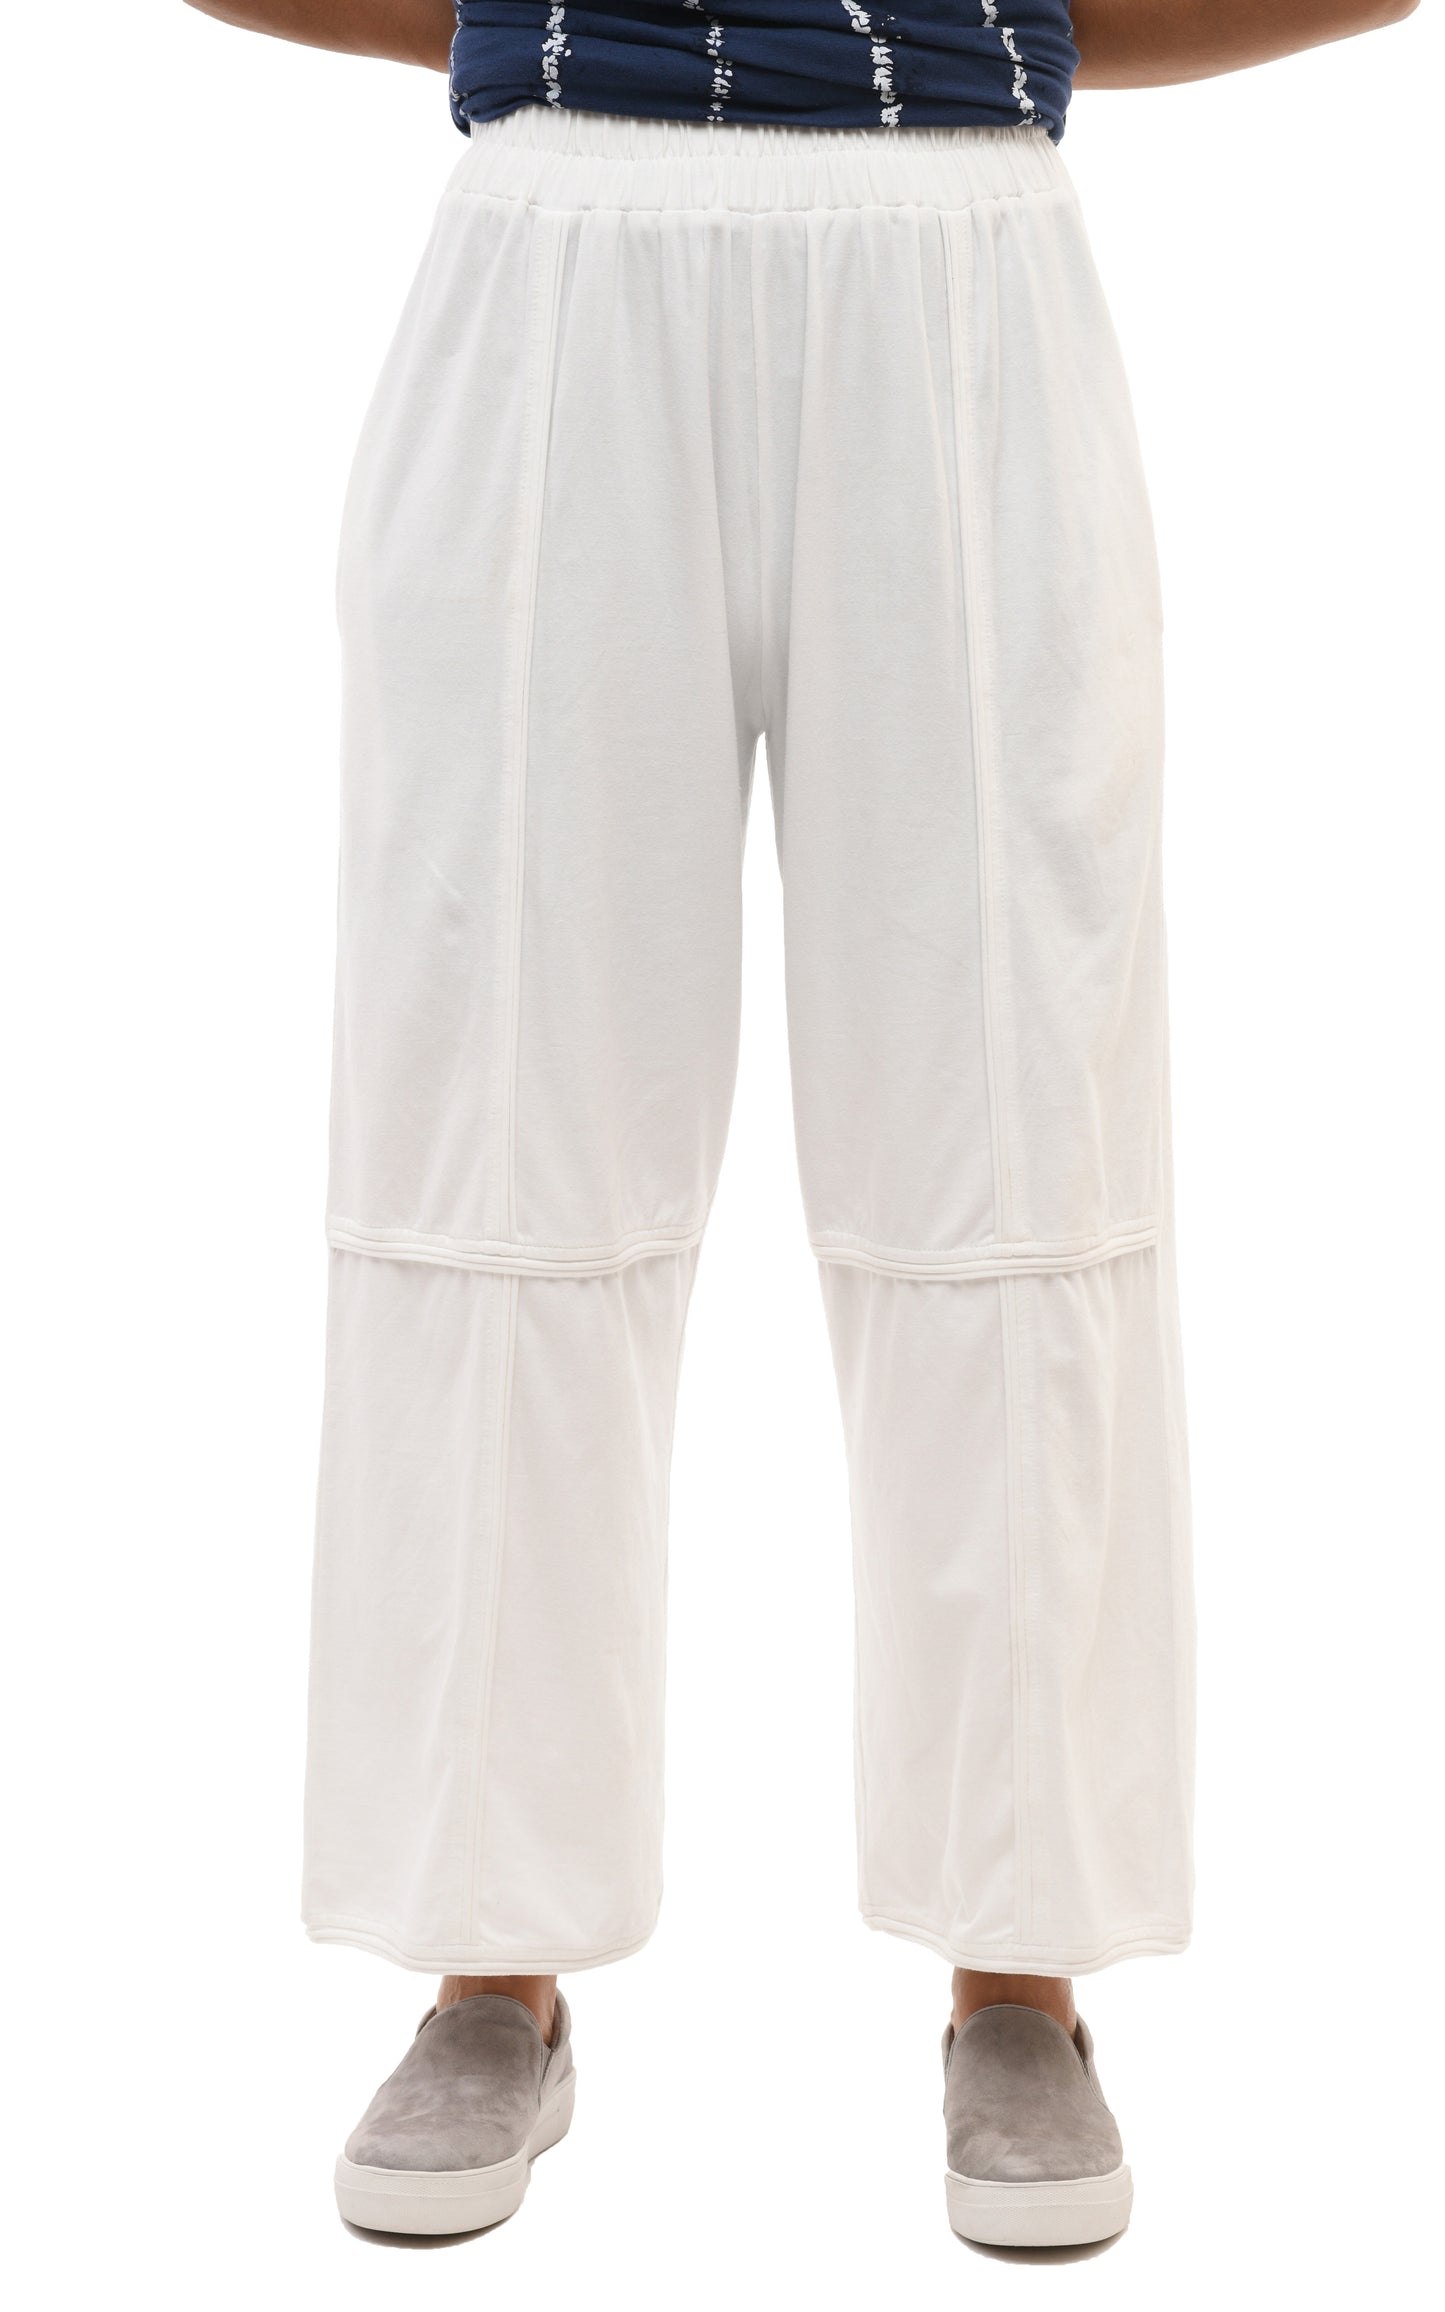 Laila Lounge Pant in Cream Cotton by Snapdragon & Twig (Modal)